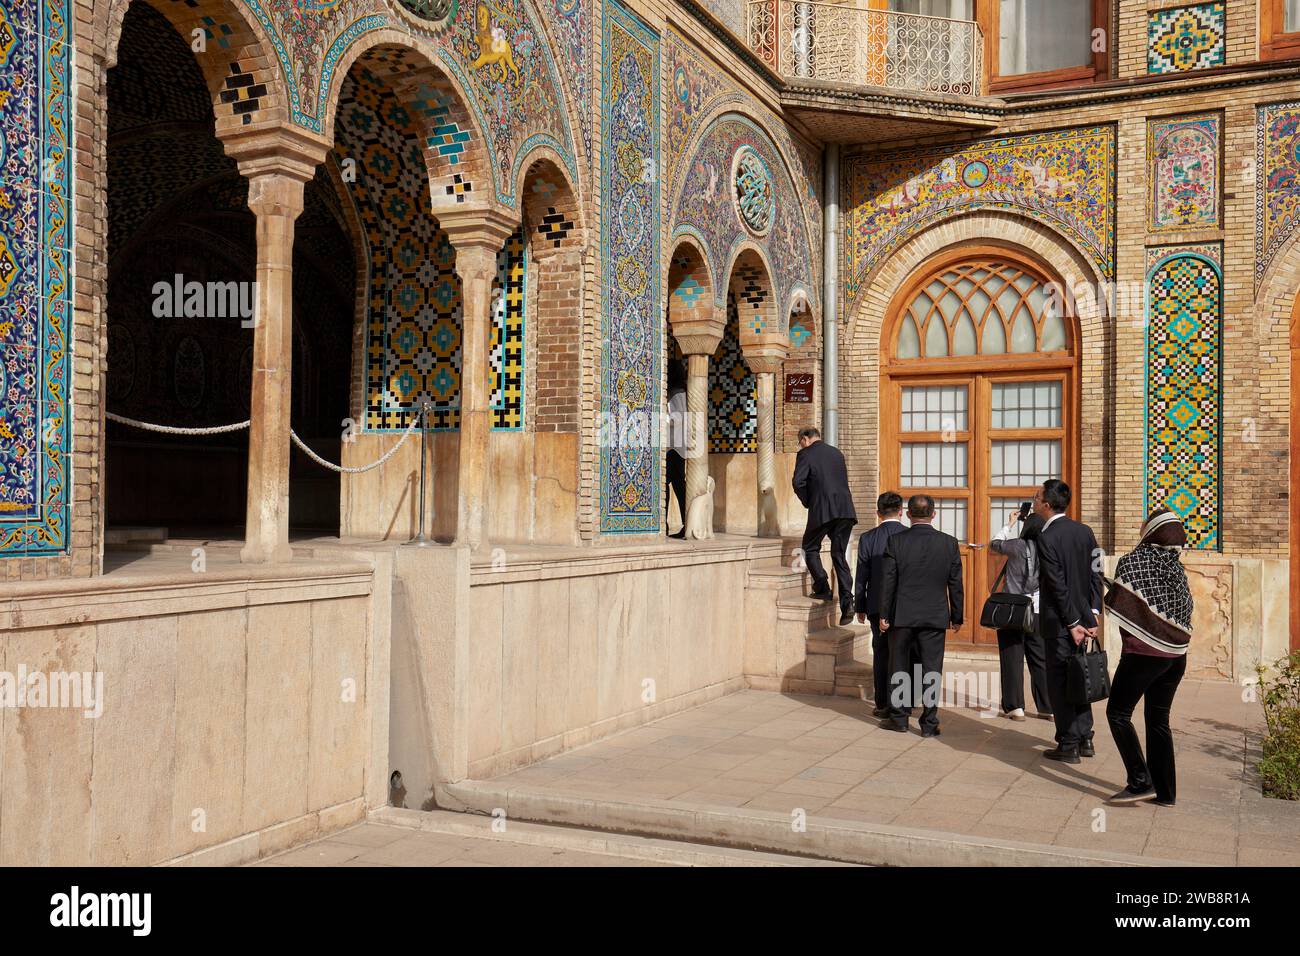 Visitors in business suits enter the Karim Khani Nook, a structure in the Golestan Palace, dating back to 1759. Tehran, Iran. Stock Photo